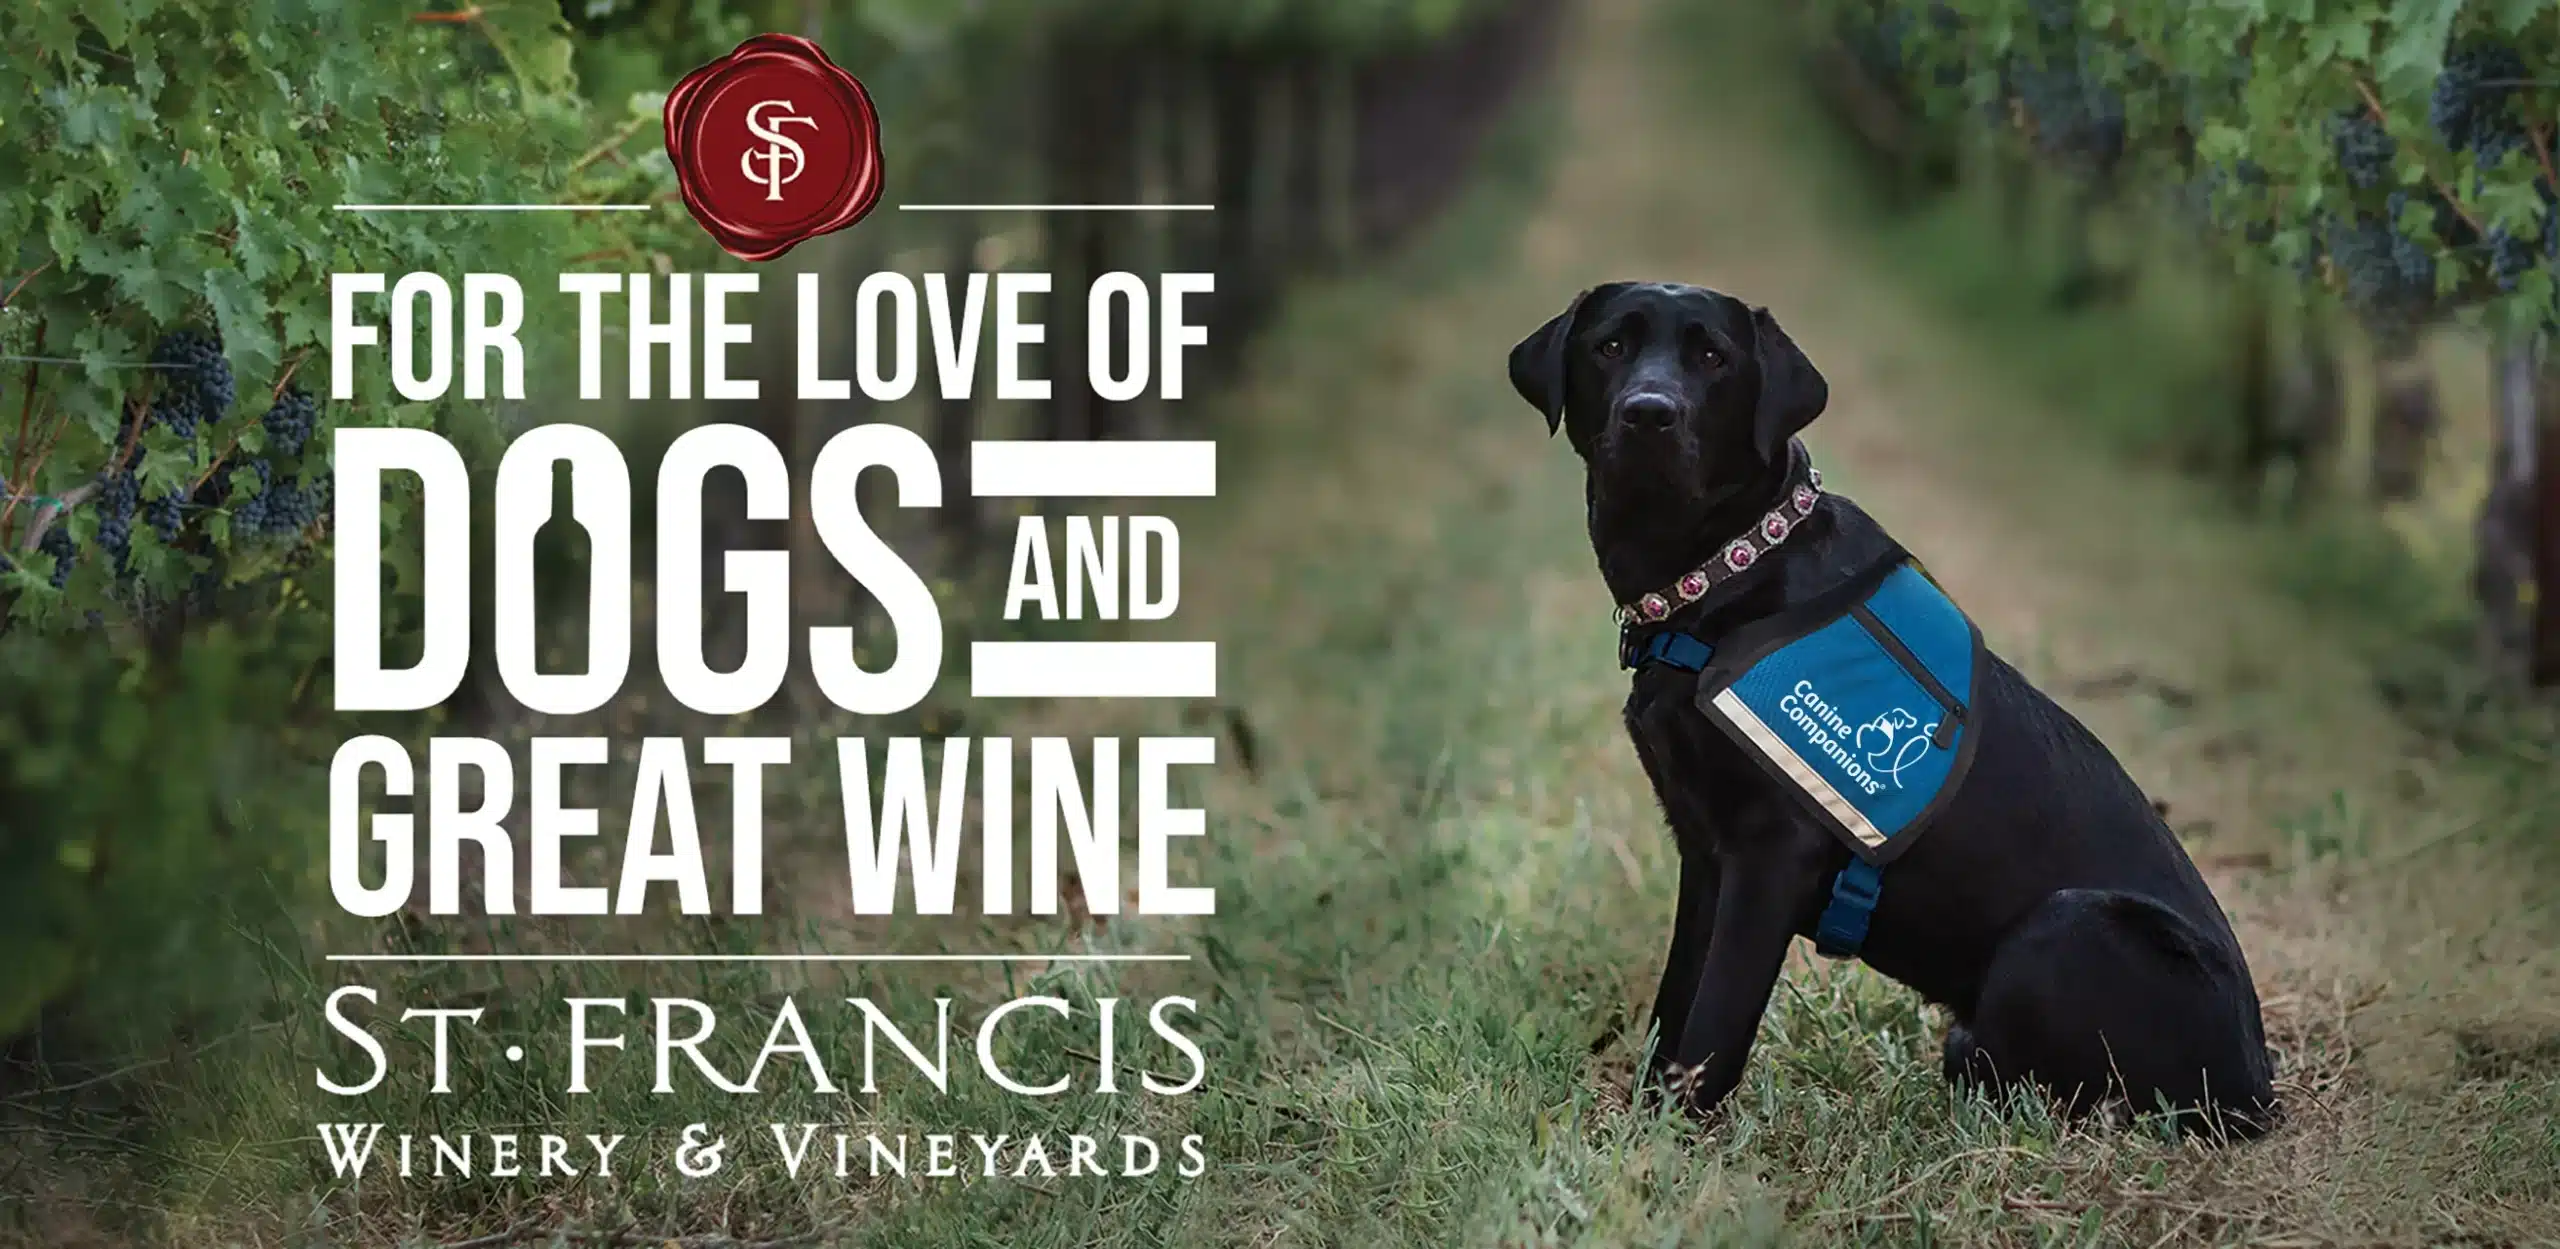 A black lab in a blue service vest sitting in a vineyard with the text For The Love of dogs and great wine - st francis winery & vineyards